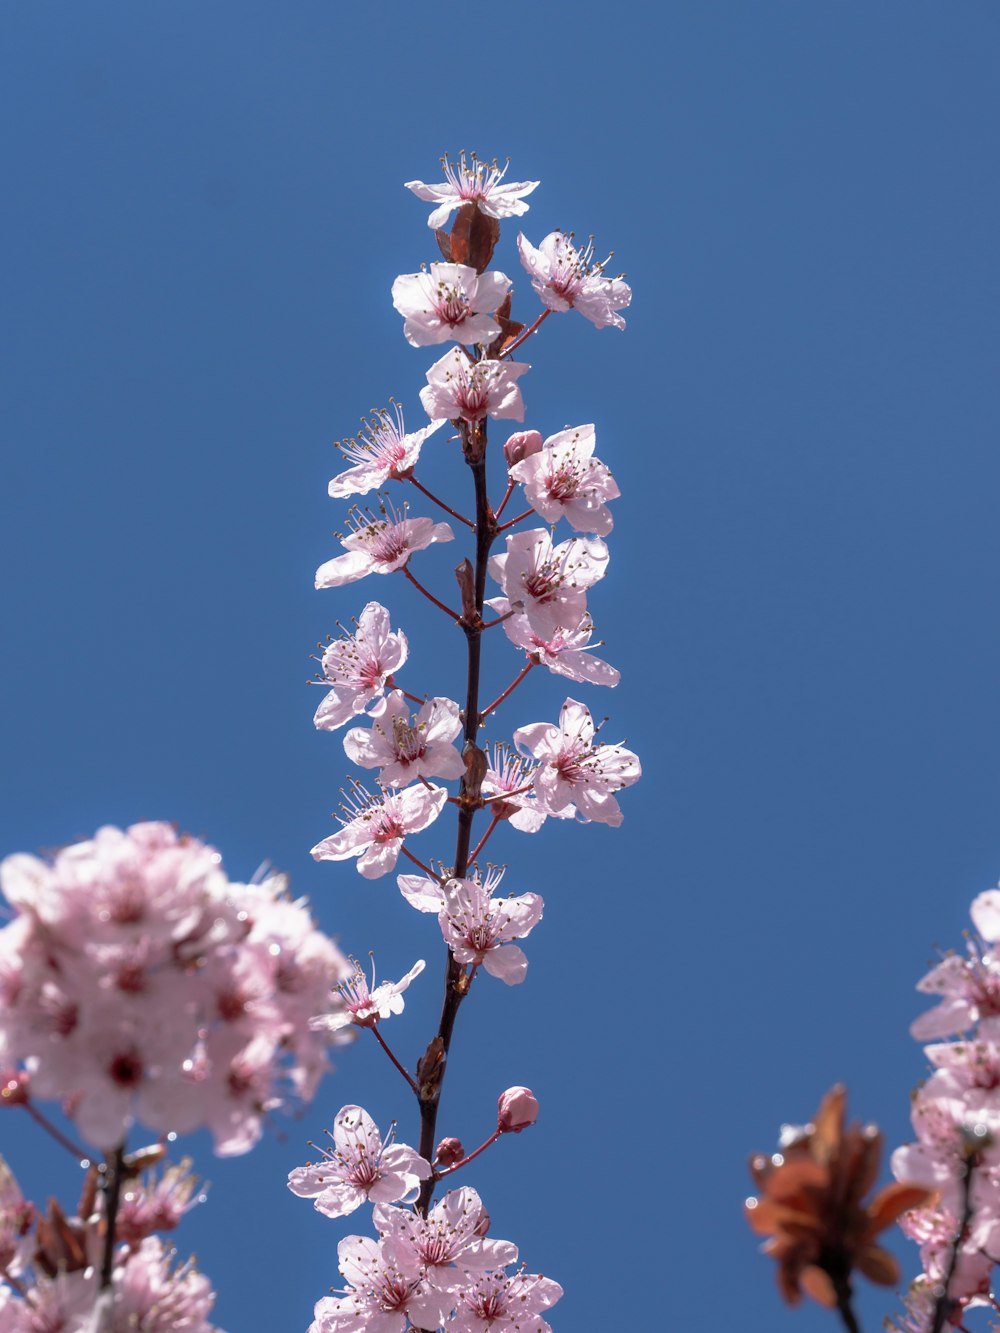 a close up of a pink flower with a blue sky in the background